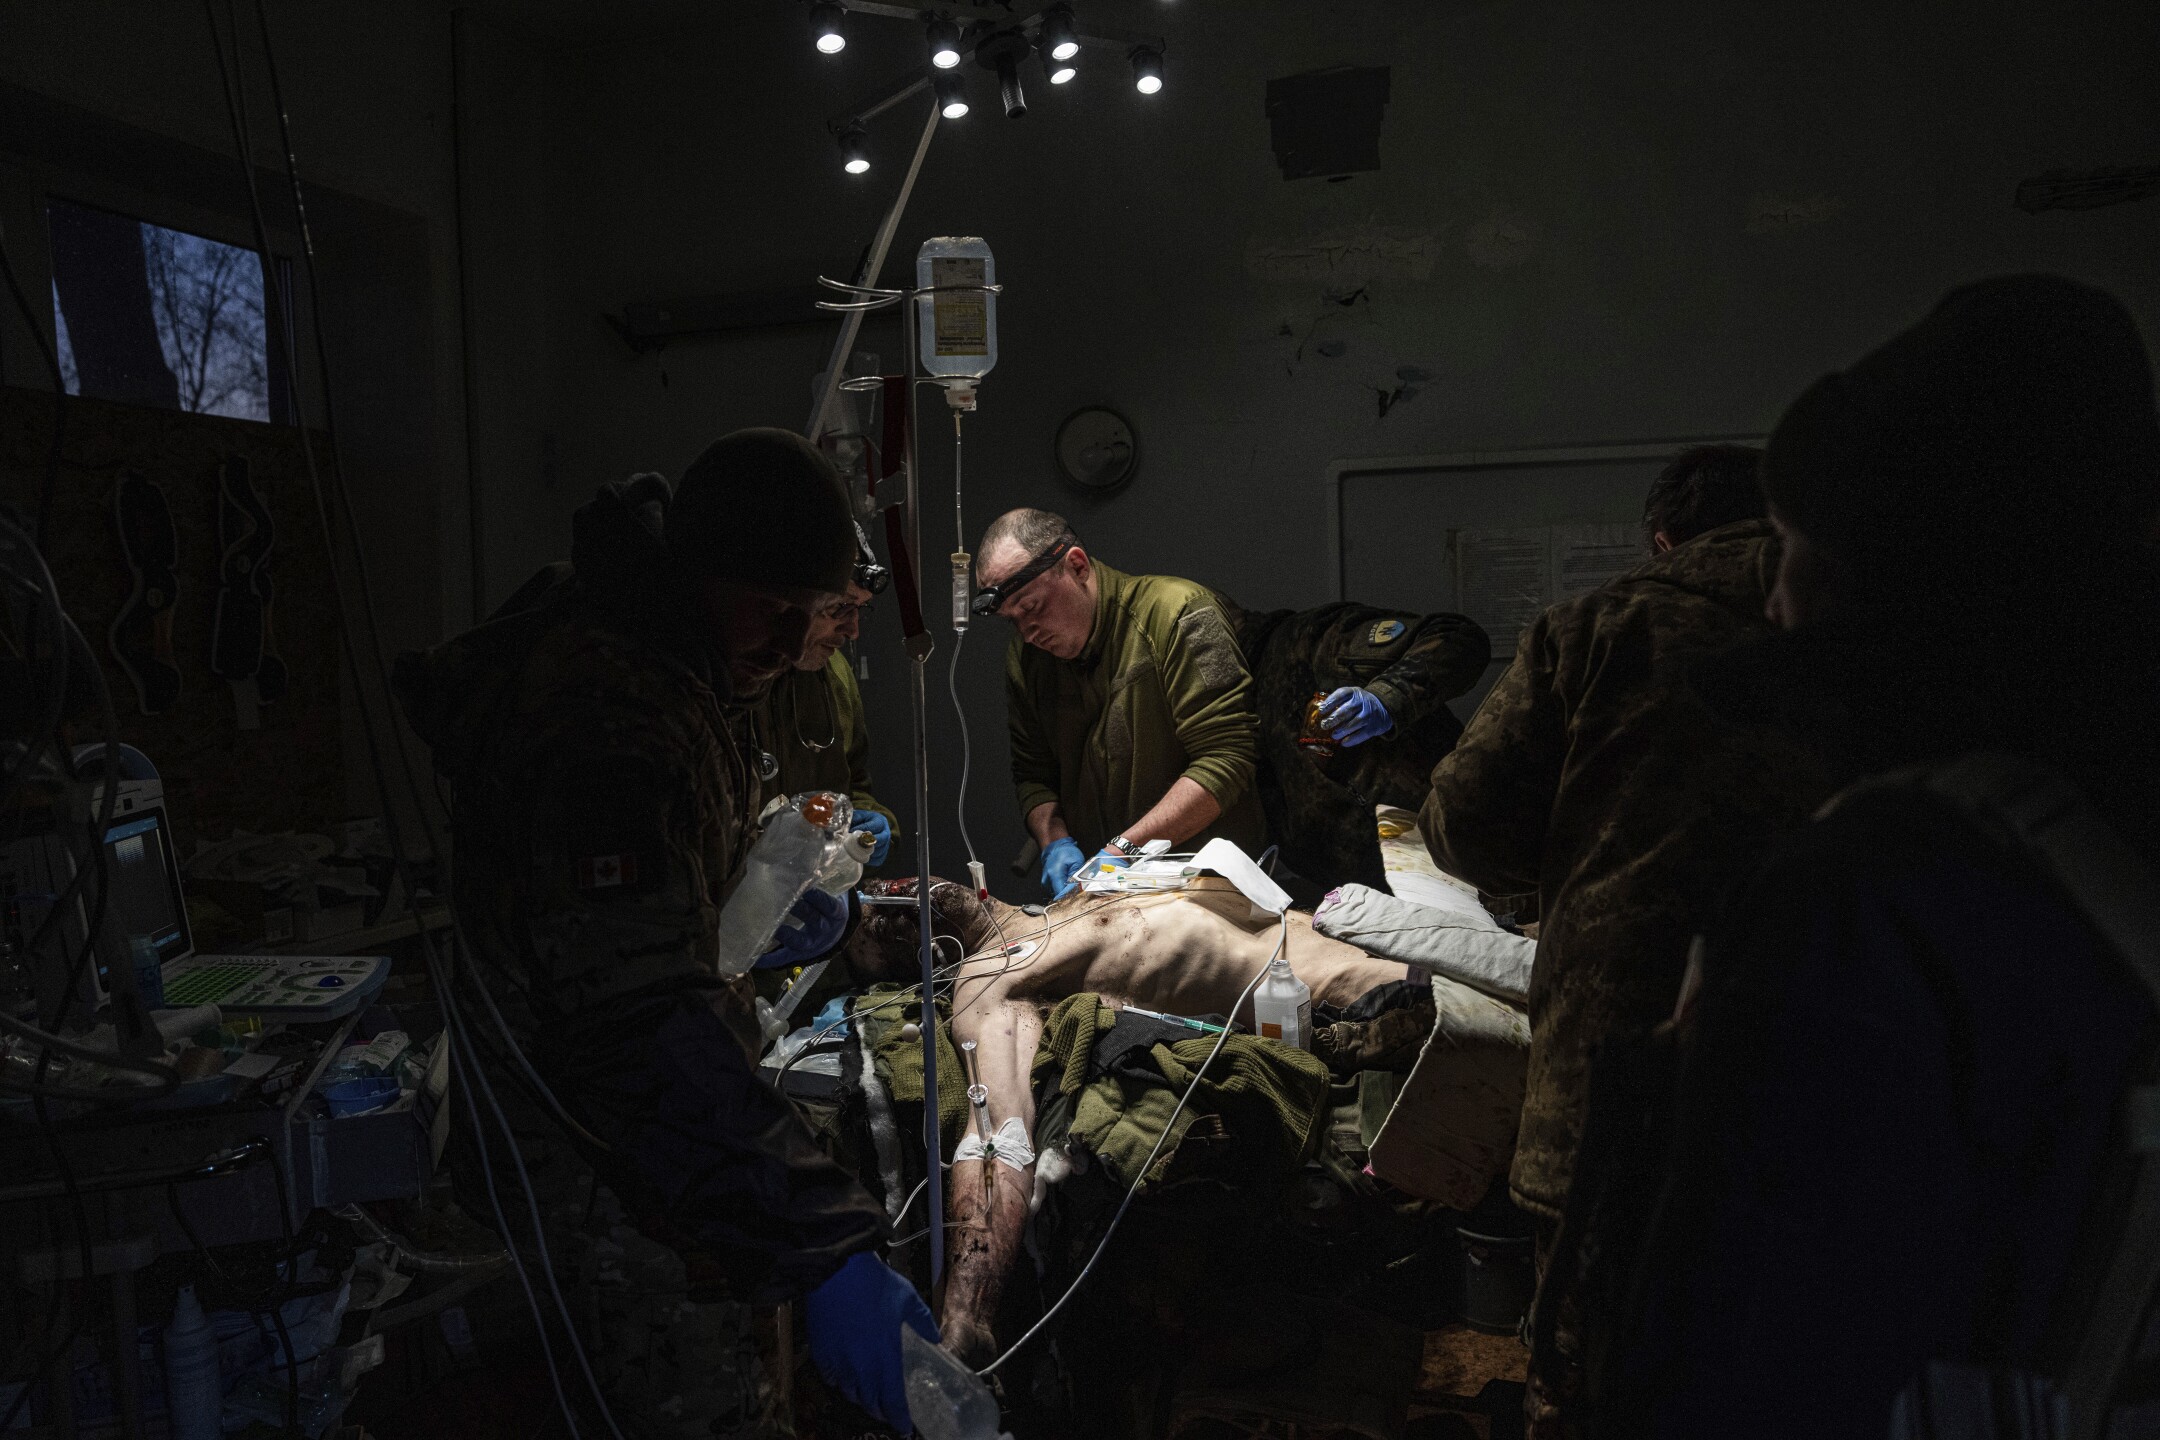 Ukrainian military doctors treat their injured comrade, who was evacuated from the battlefield, at the hospital in Ukraine's Donetsk region on Jan. 9, 2023. The serviceman did not survive. (AP Photo/Evgeniy Maloletka)